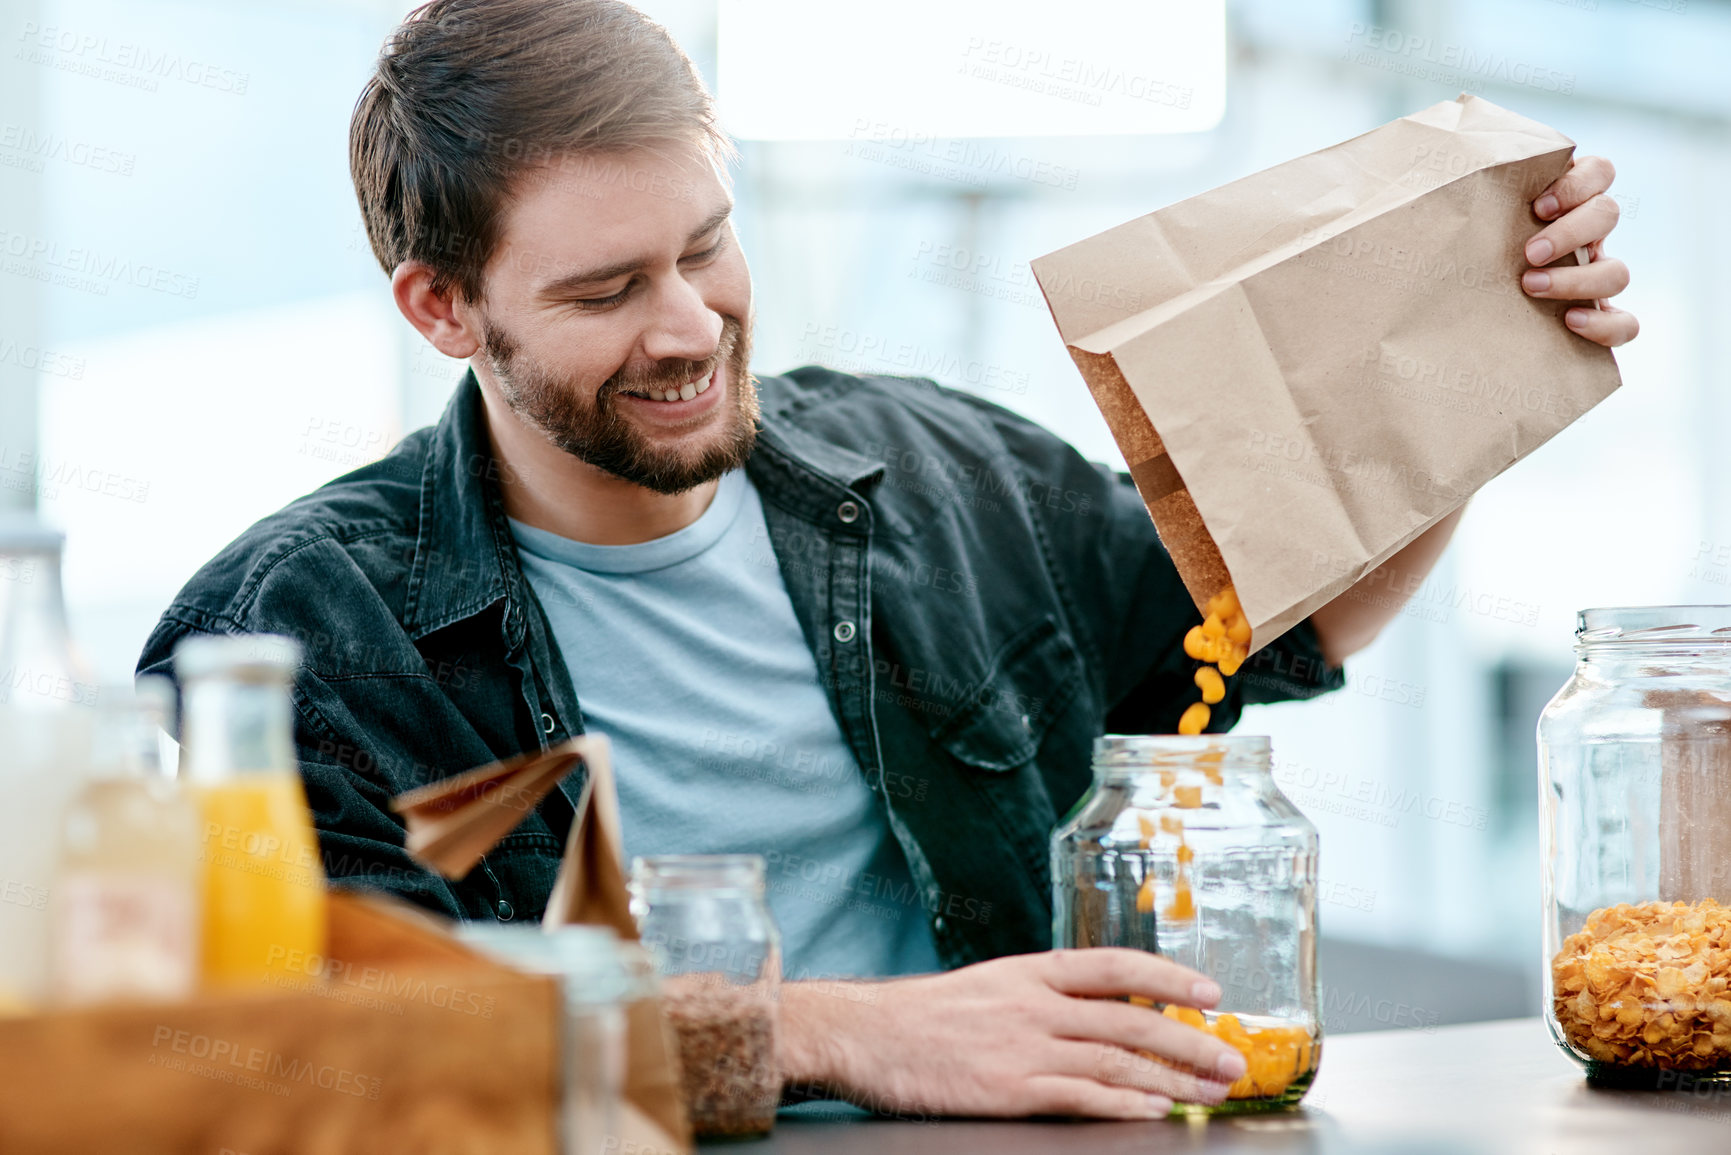 Buy stock photo Shot of a young man packing his groceries into glass containers after returning home from the store